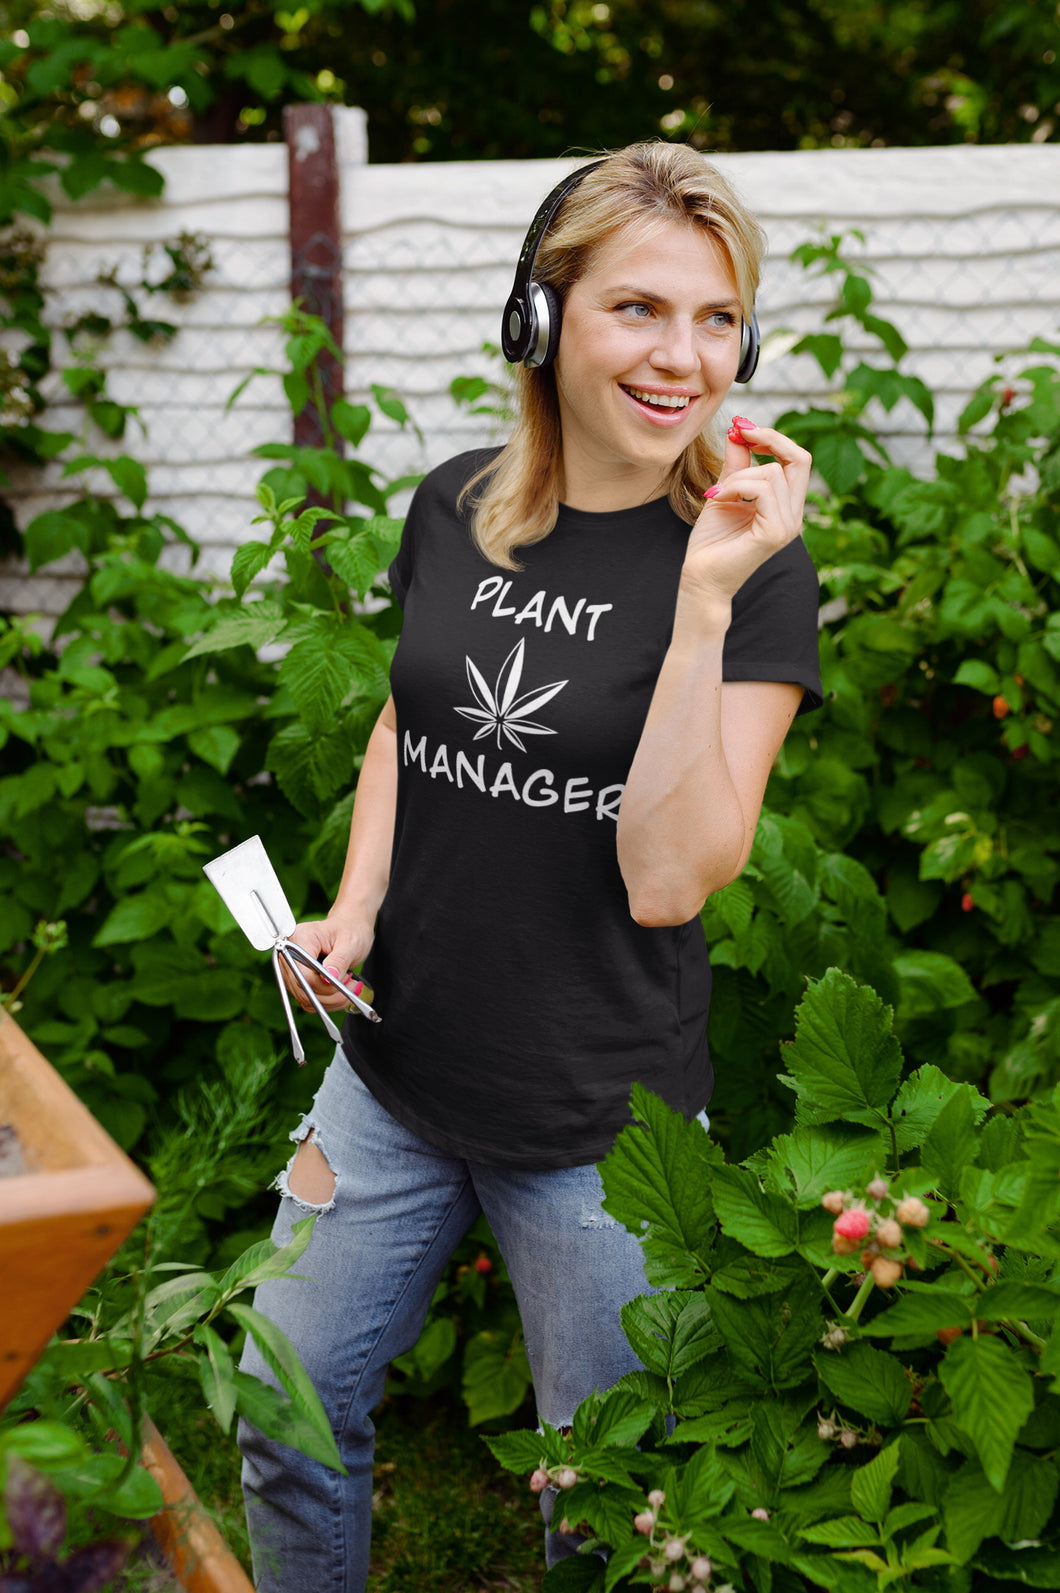 Plant Manager T-shirt